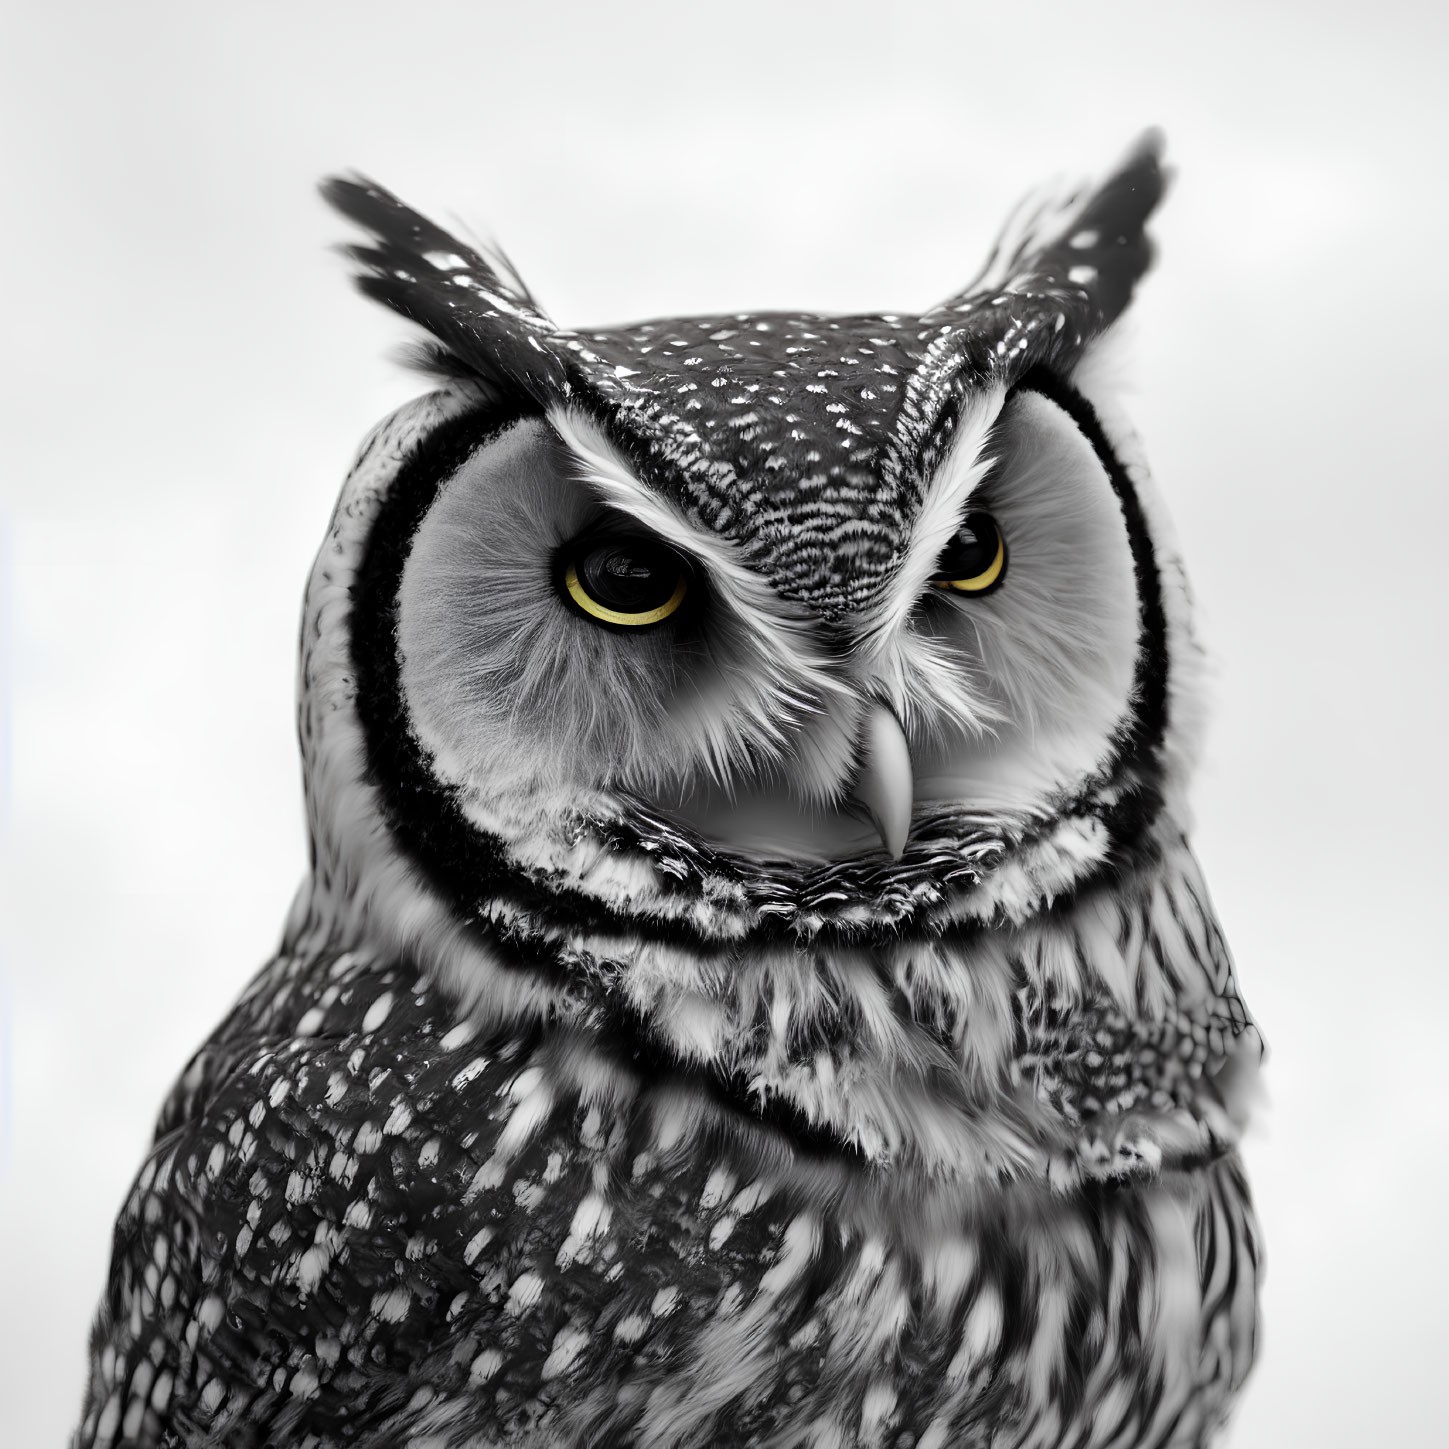 Detailed black and white close-up of owl with intense yellow eyes and speckled feathers